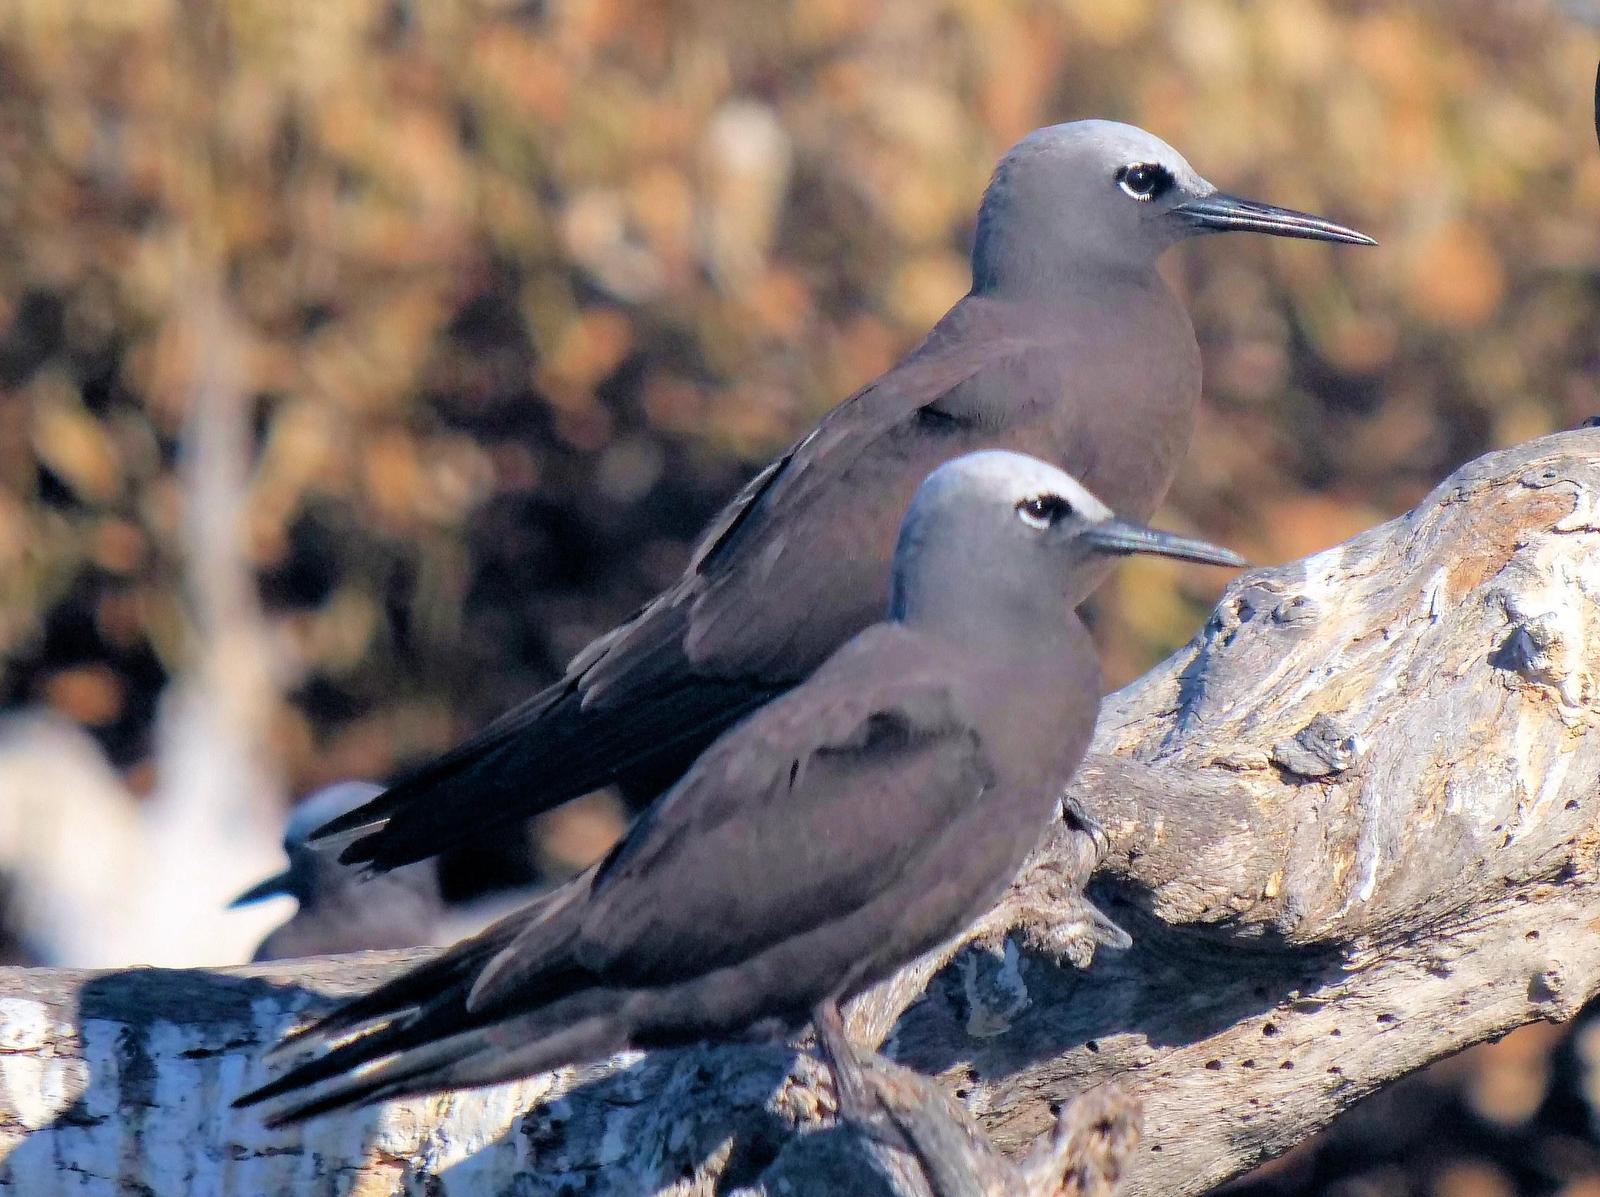 Lesser Noddy Photo by Peter Lowe